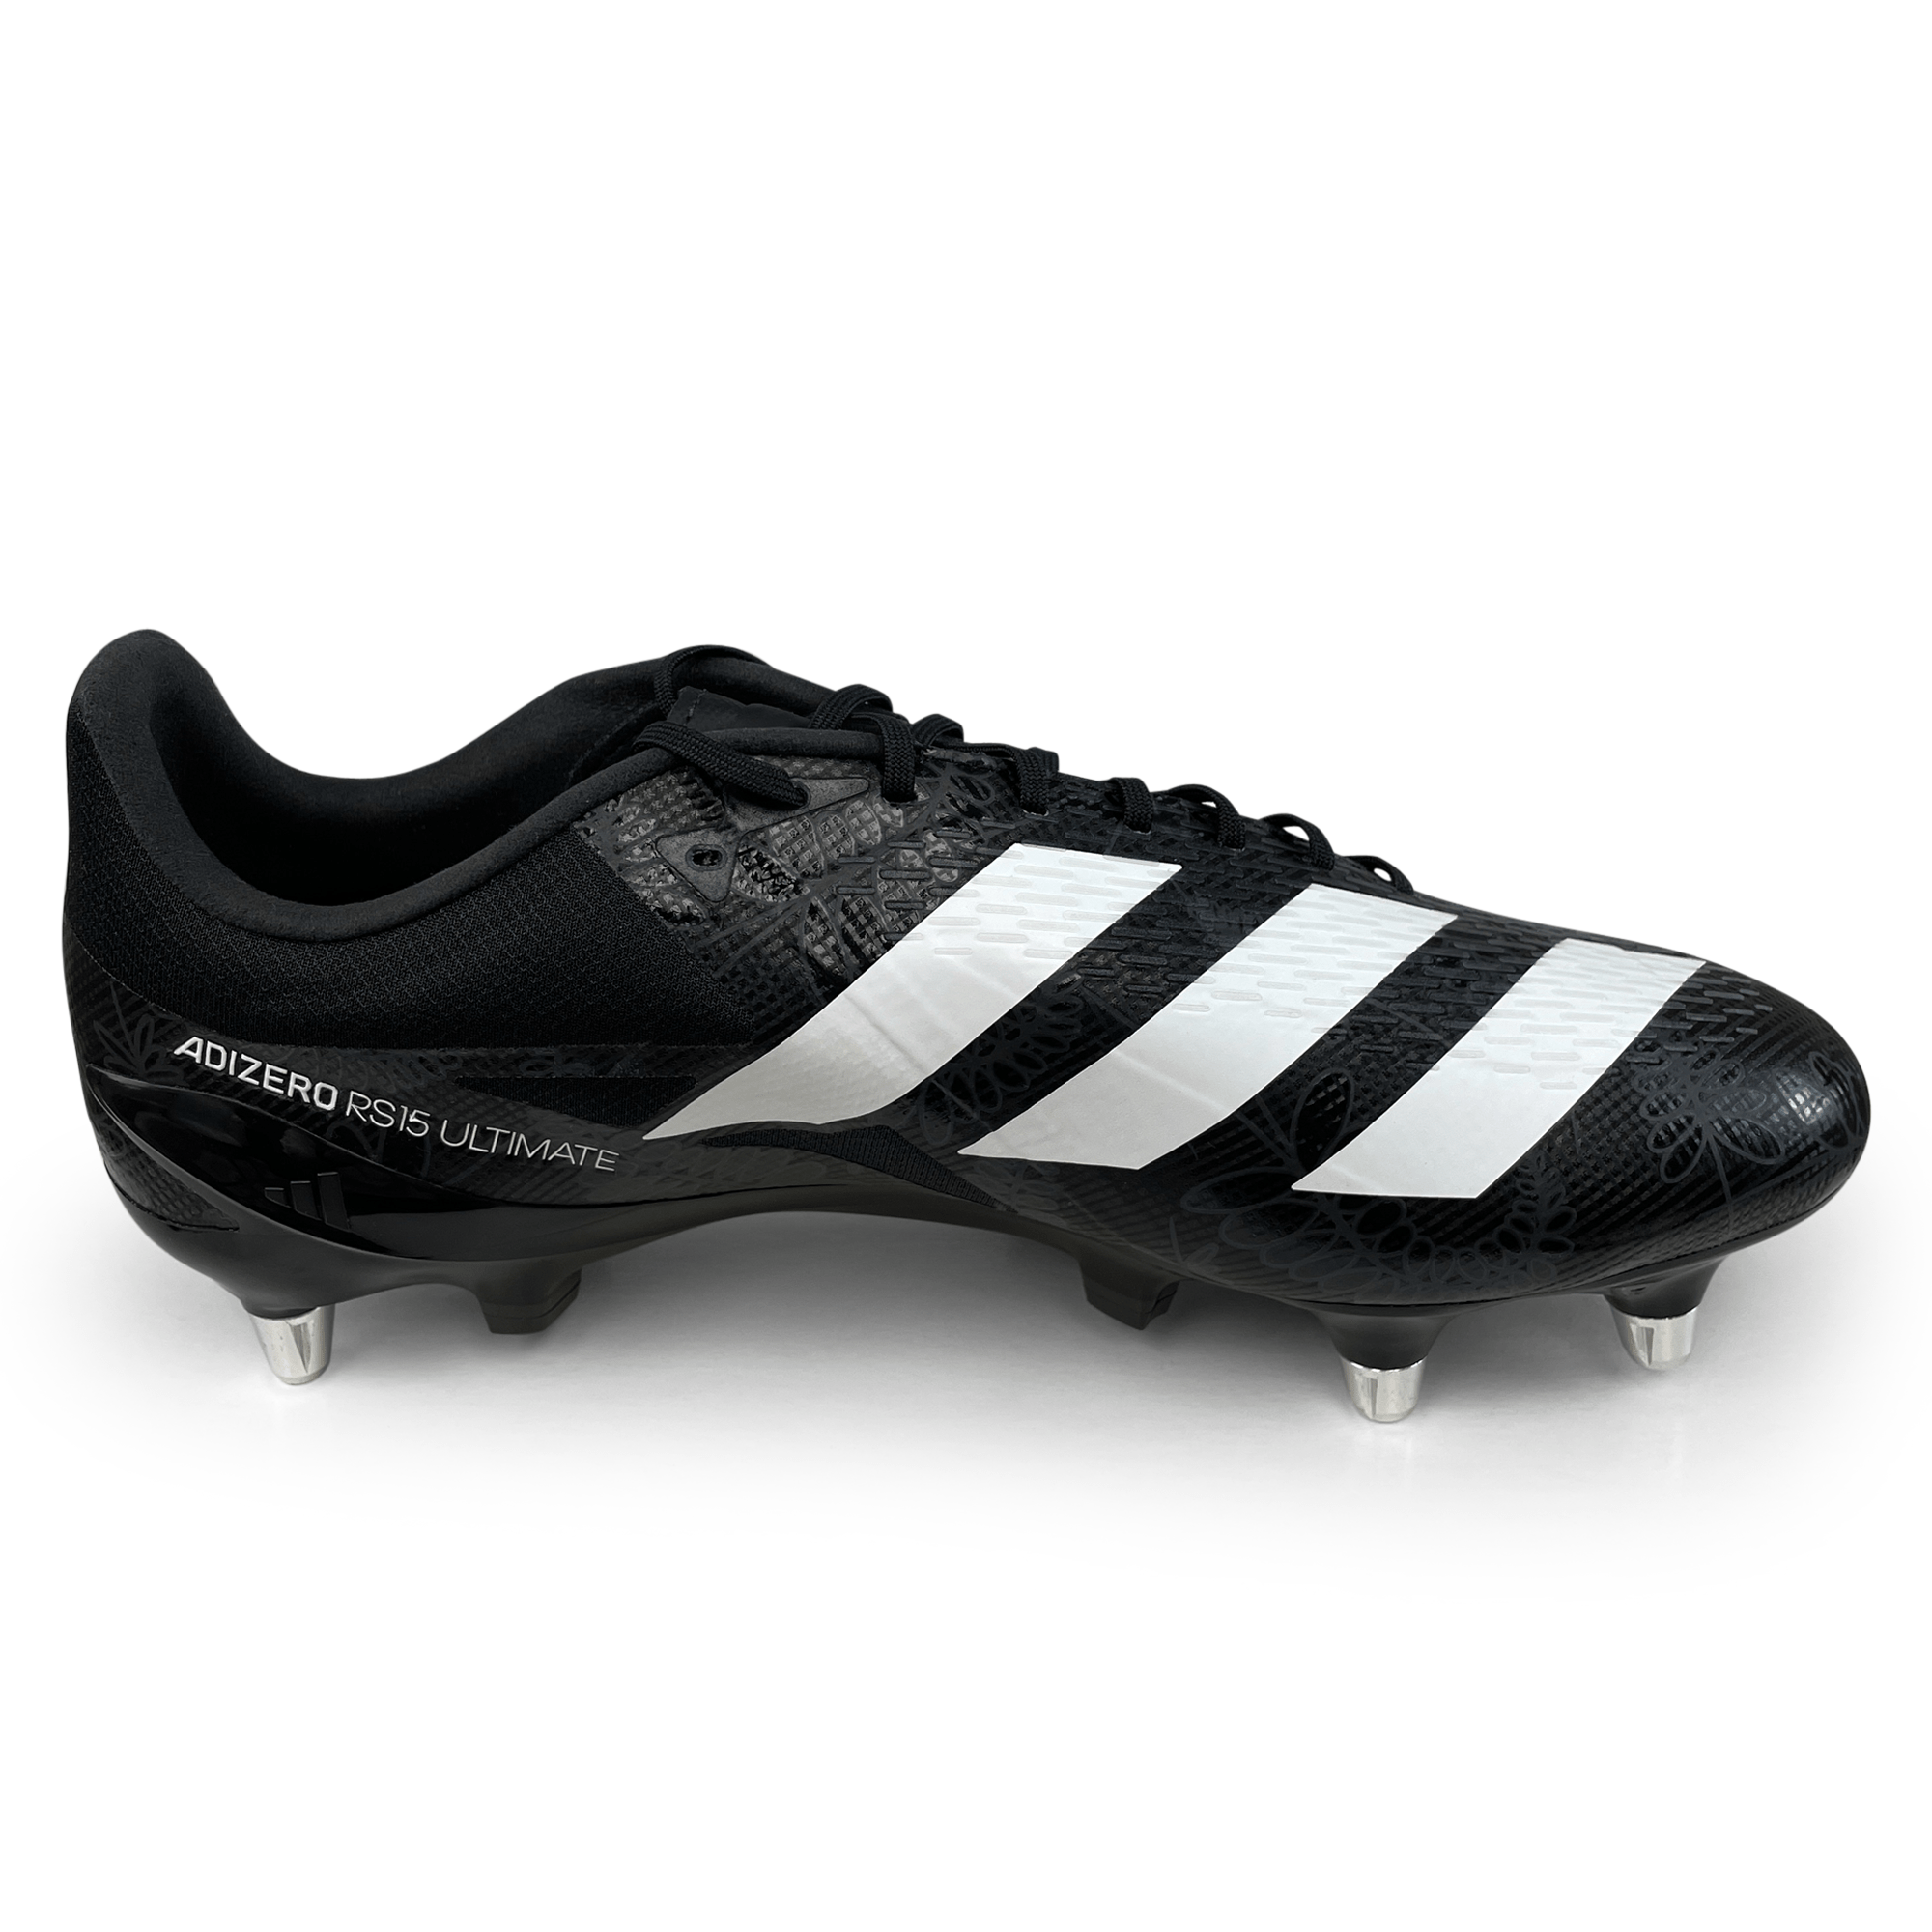 adidas adizero RS15 Ultimate Rugby Cleat - Soft Ground Boot - Core